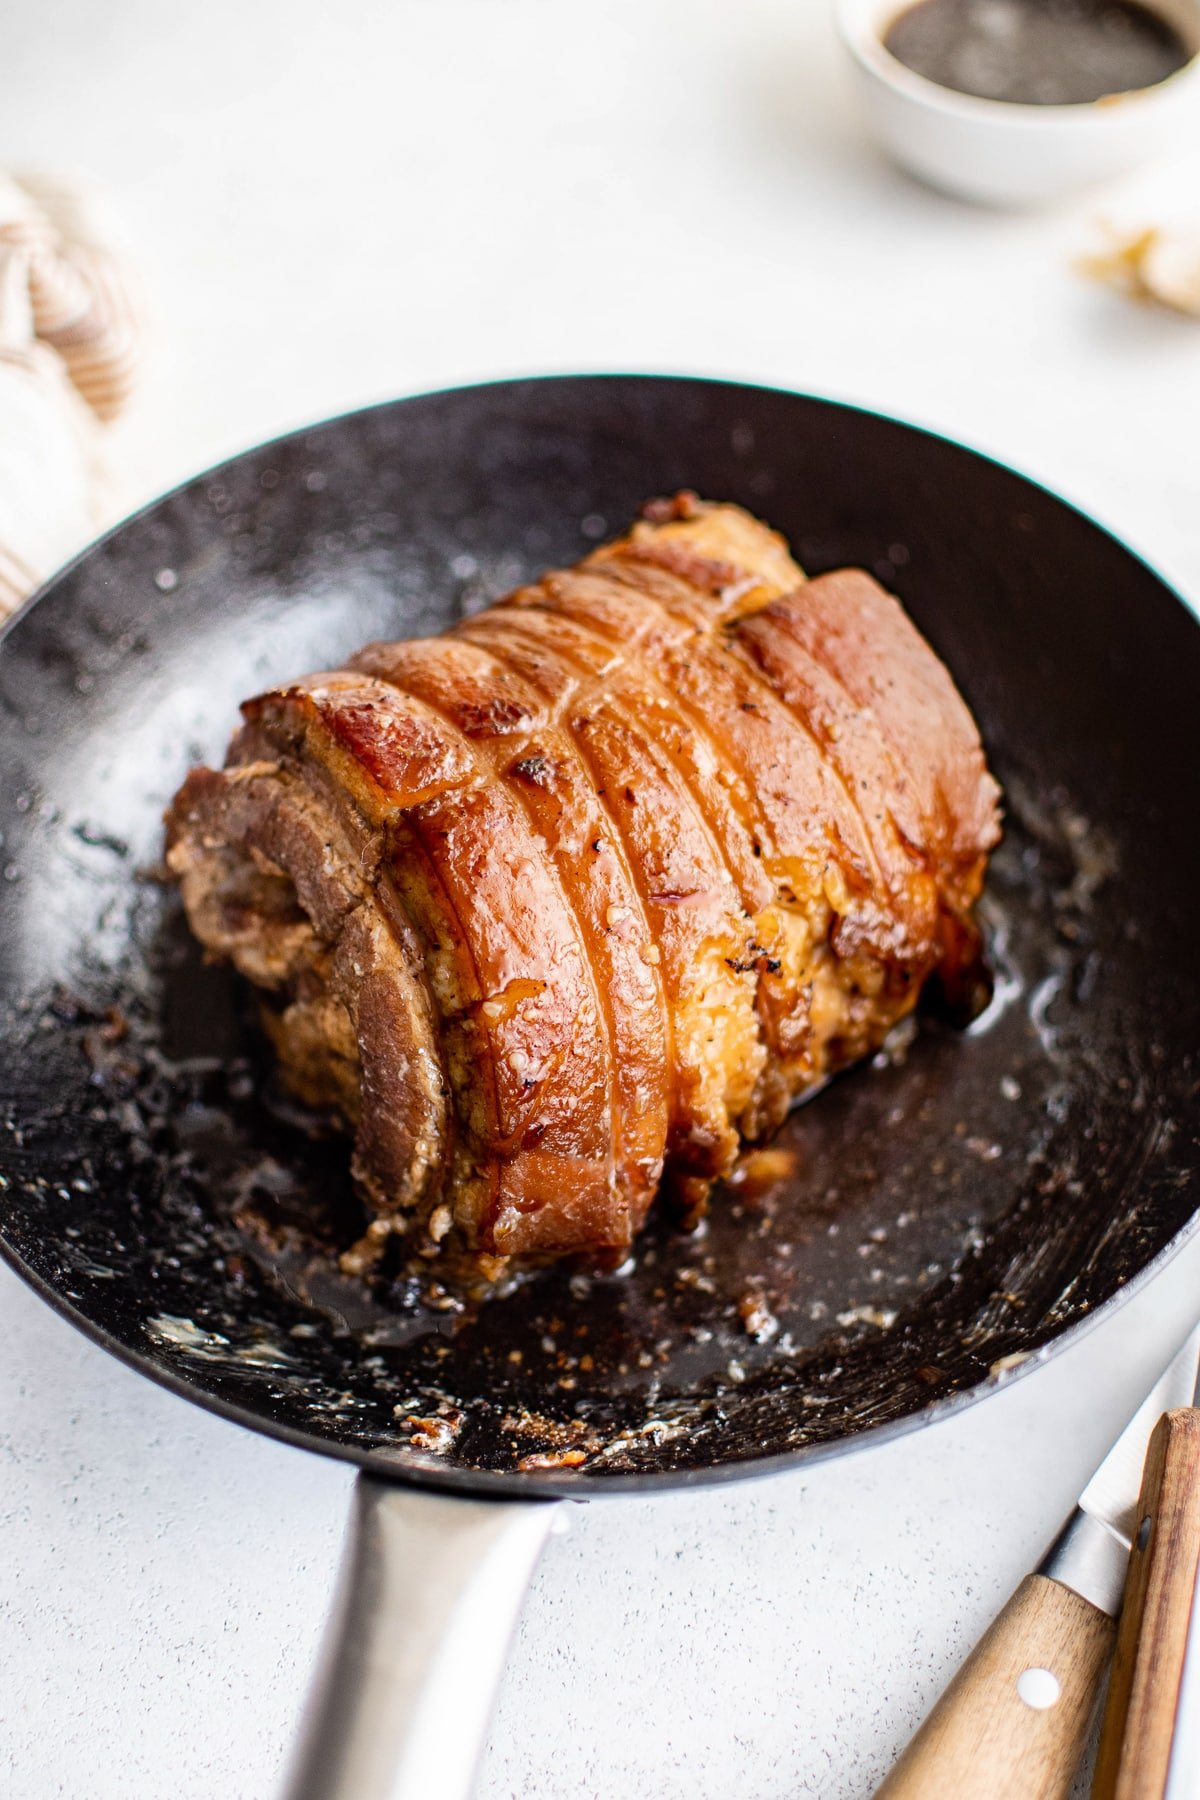 Chashu Pork - The Forked Spoon